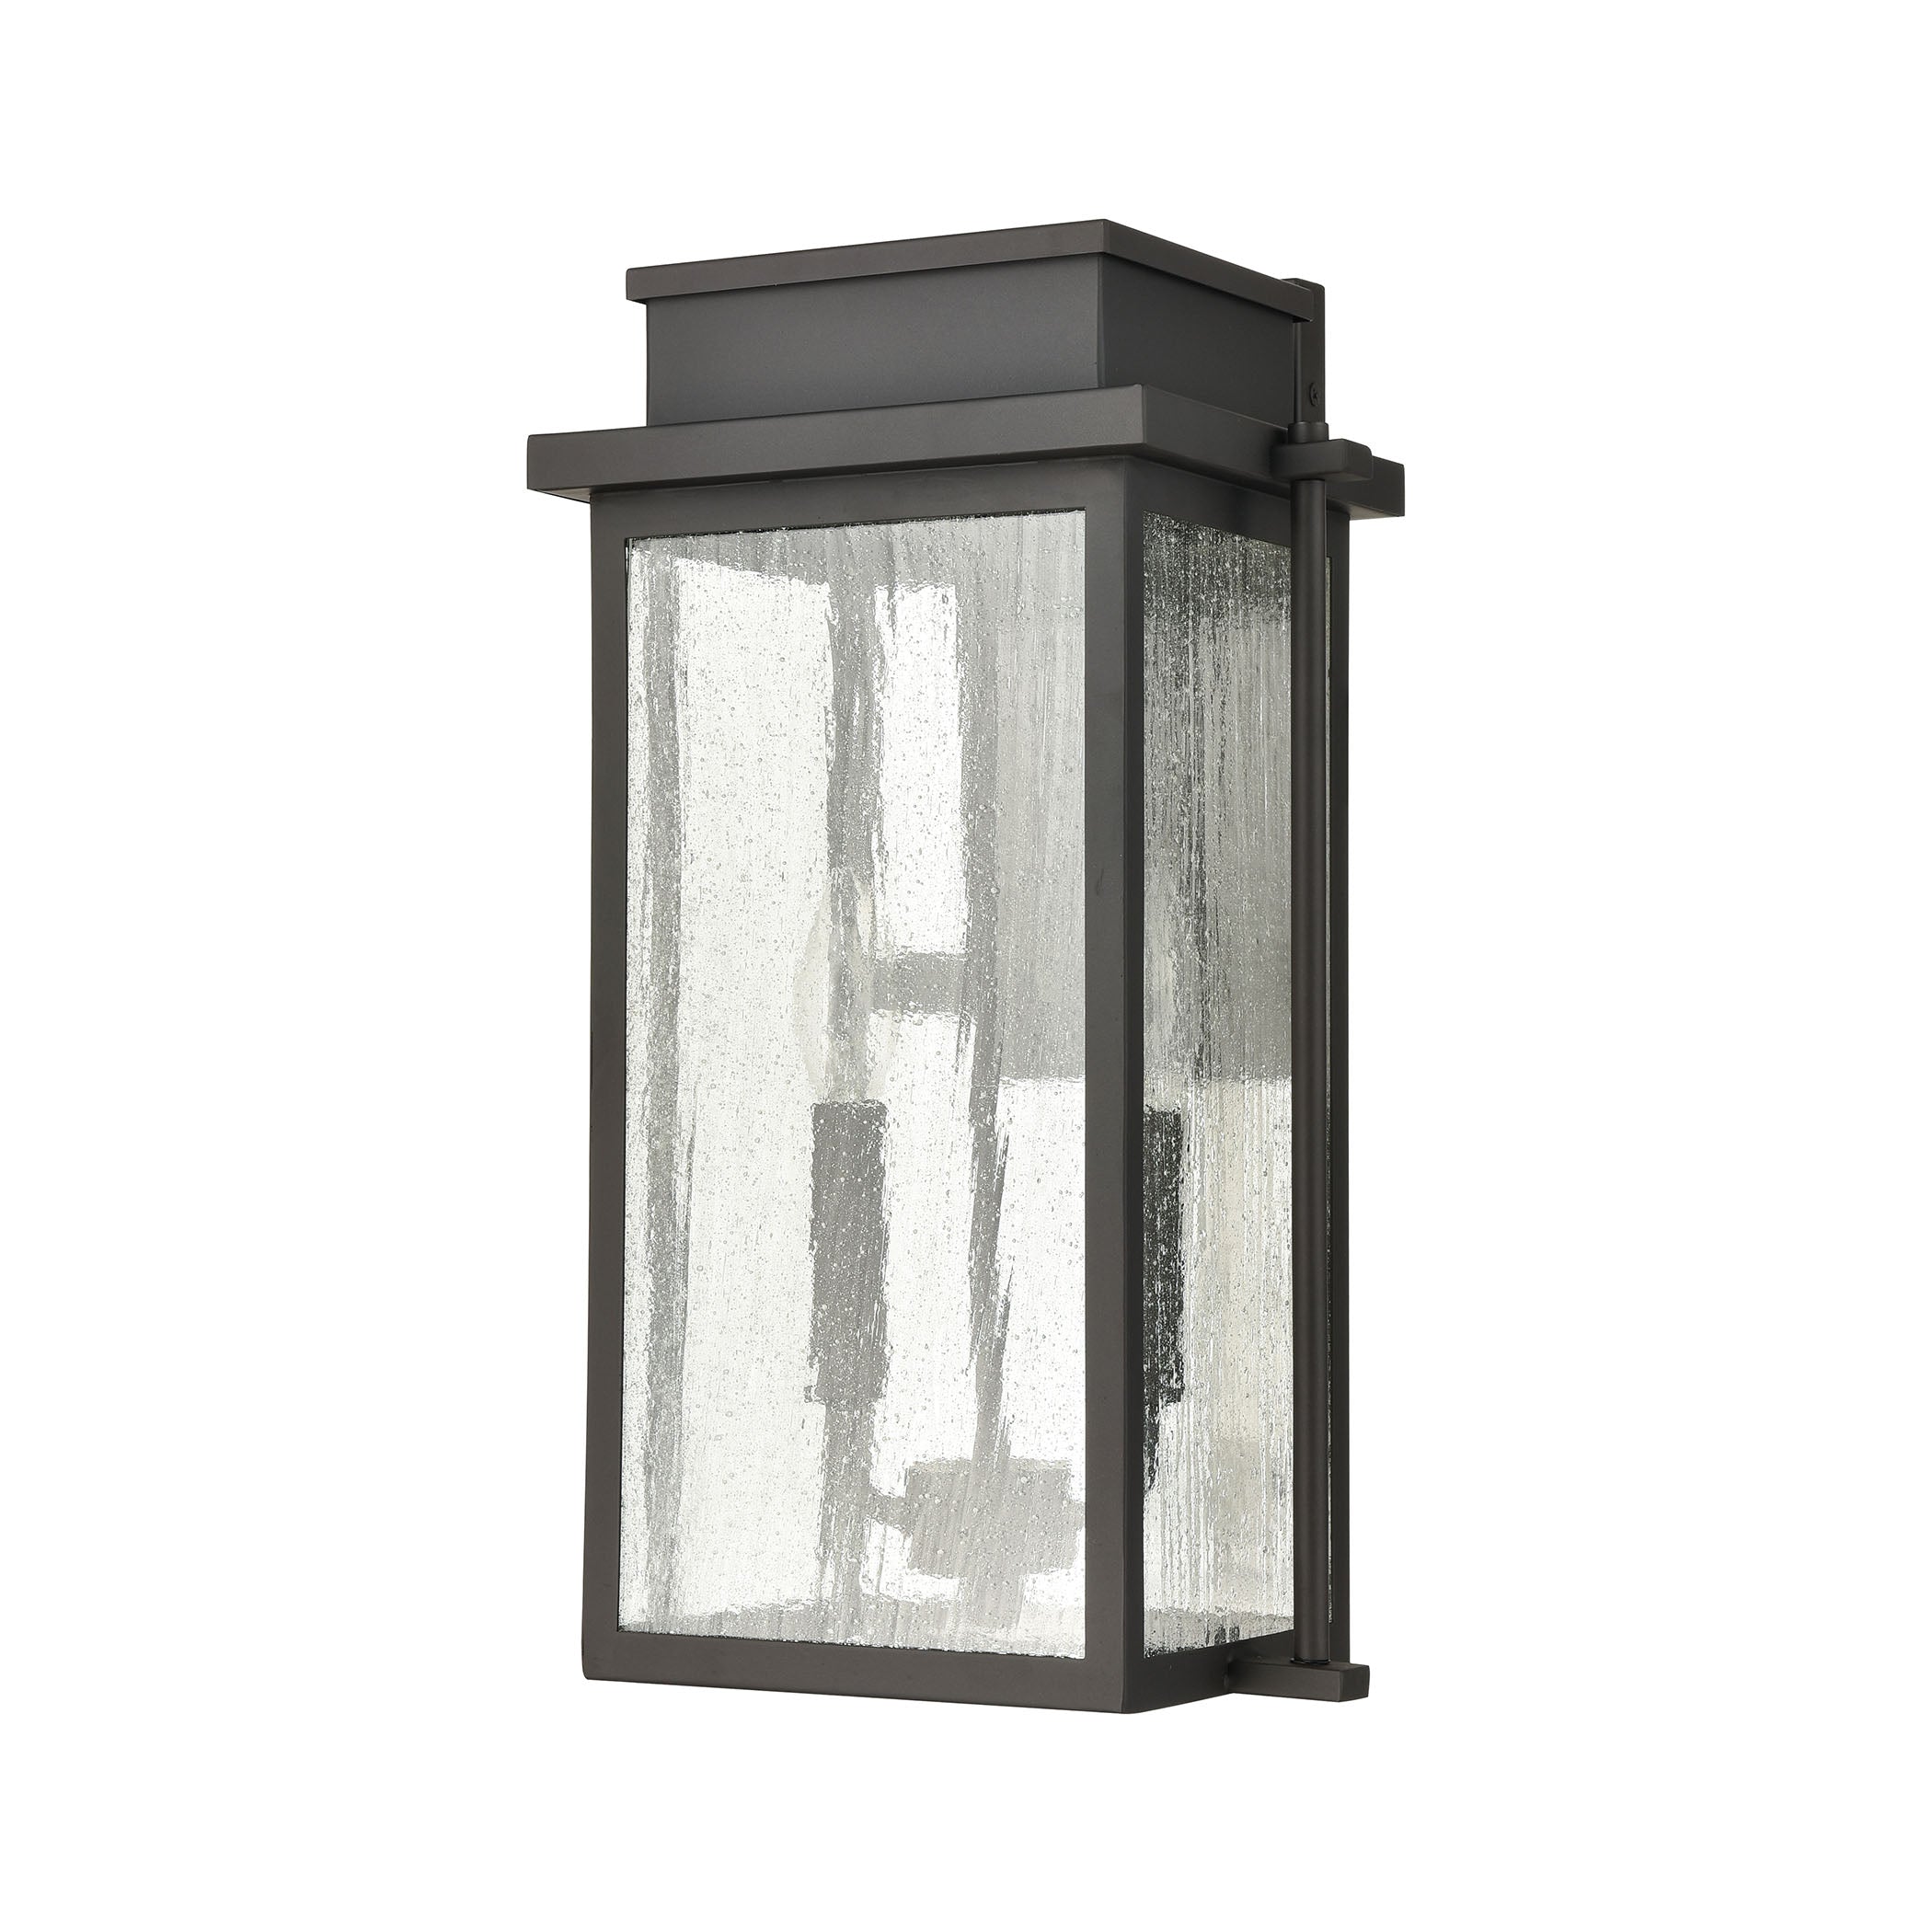 ELK Lighting 45441/2 Braddock 2-Light Outdoor Sconce in Architectural Bronze with Seedy Glass Enclosure